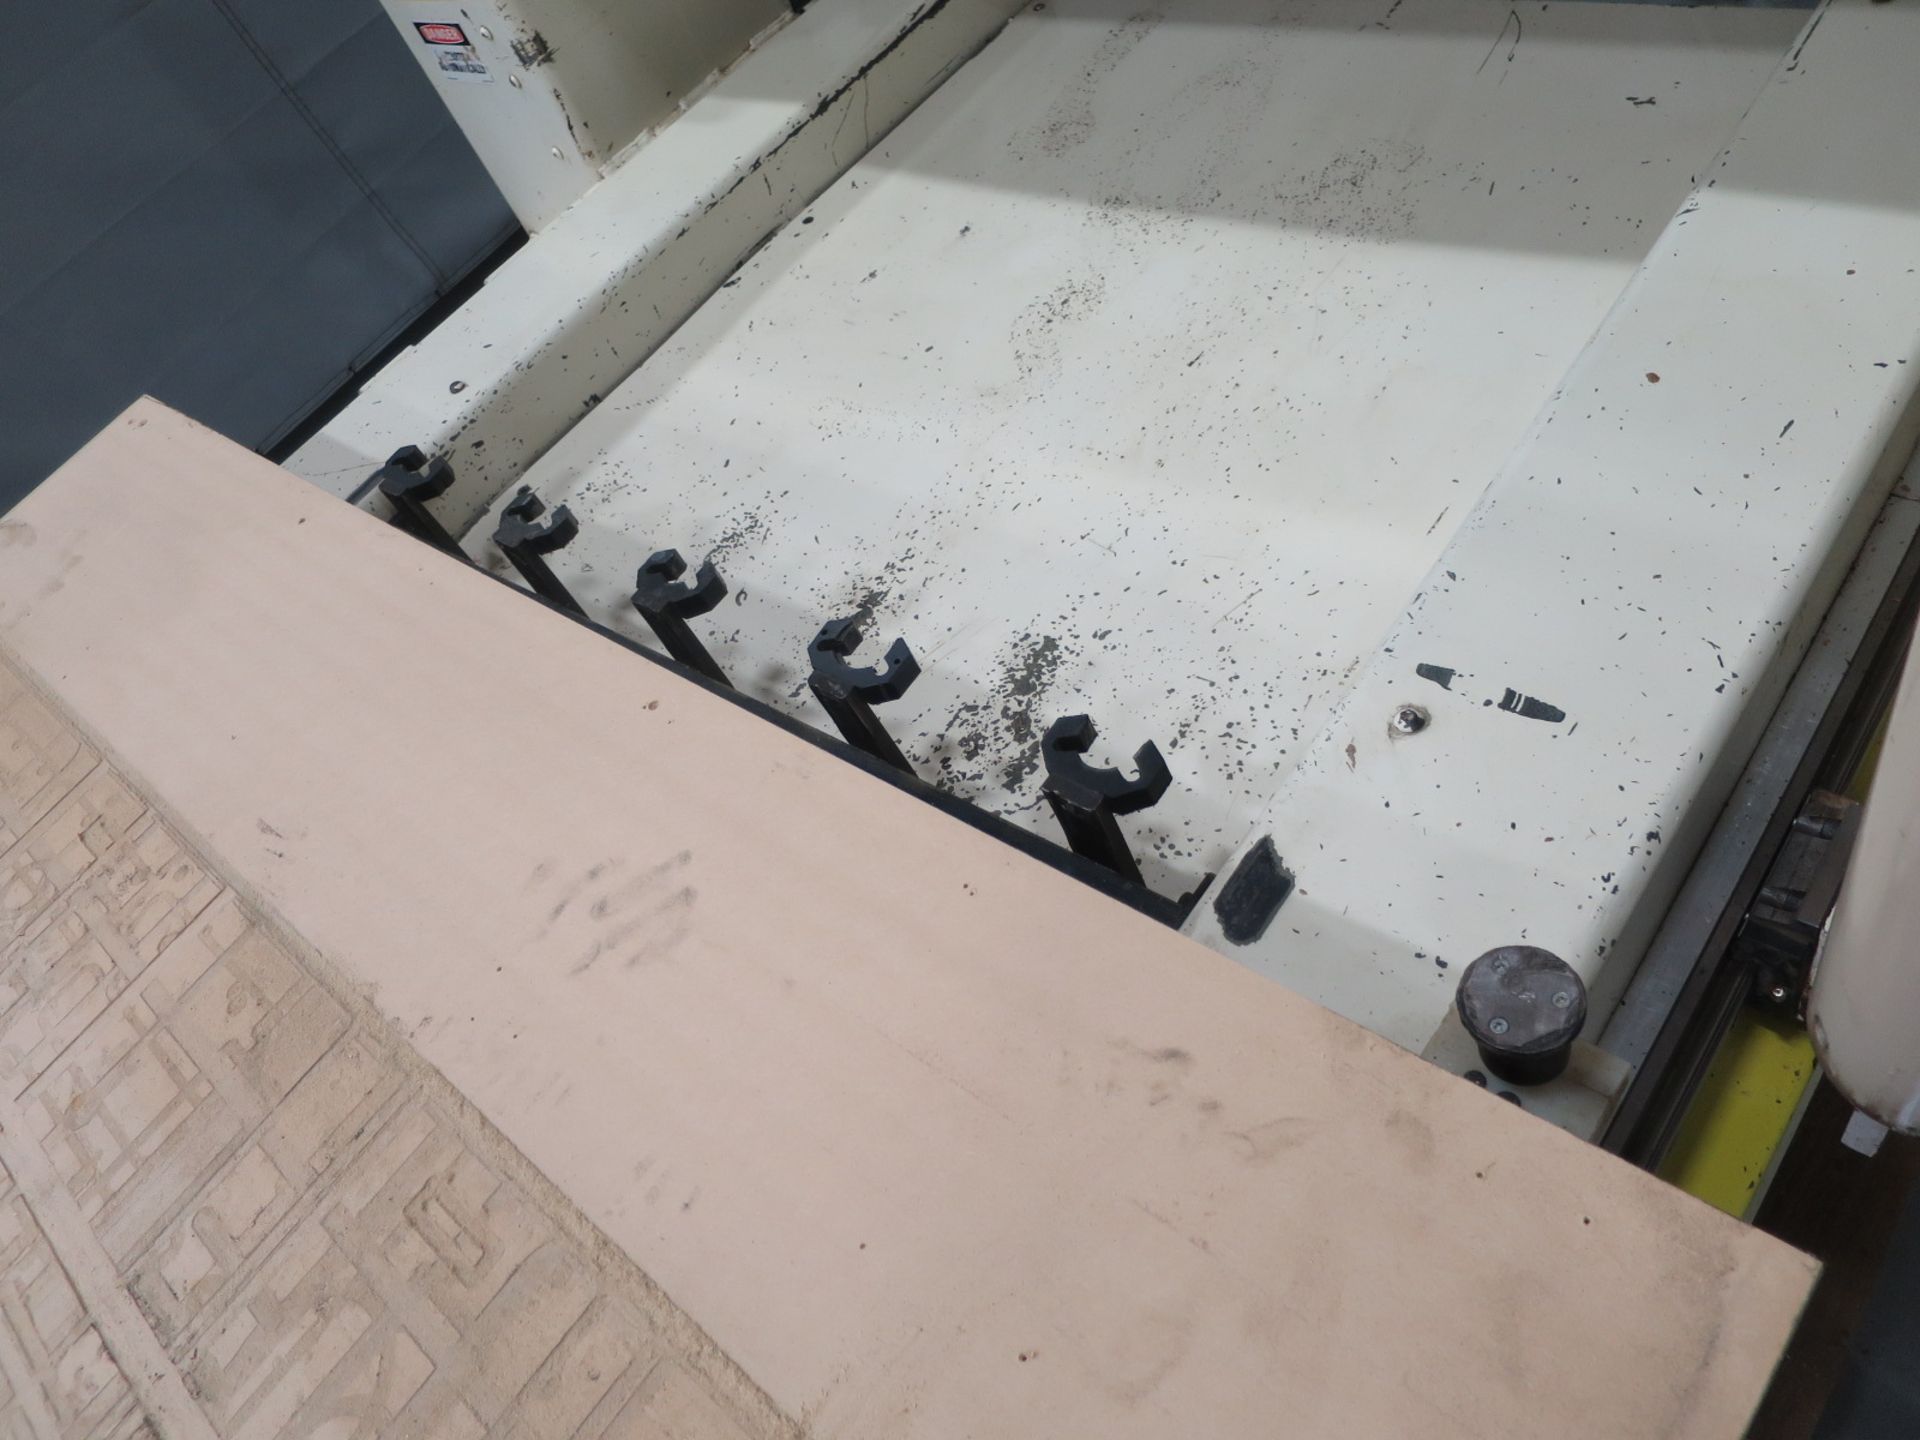 5'X'10' THERMWOOD MODEL C-53 3-AXIS CNC ROUTER W/QCORE UPGRADE, S/N C530A rigging fee of $550.00 wil - Image 5 of 6